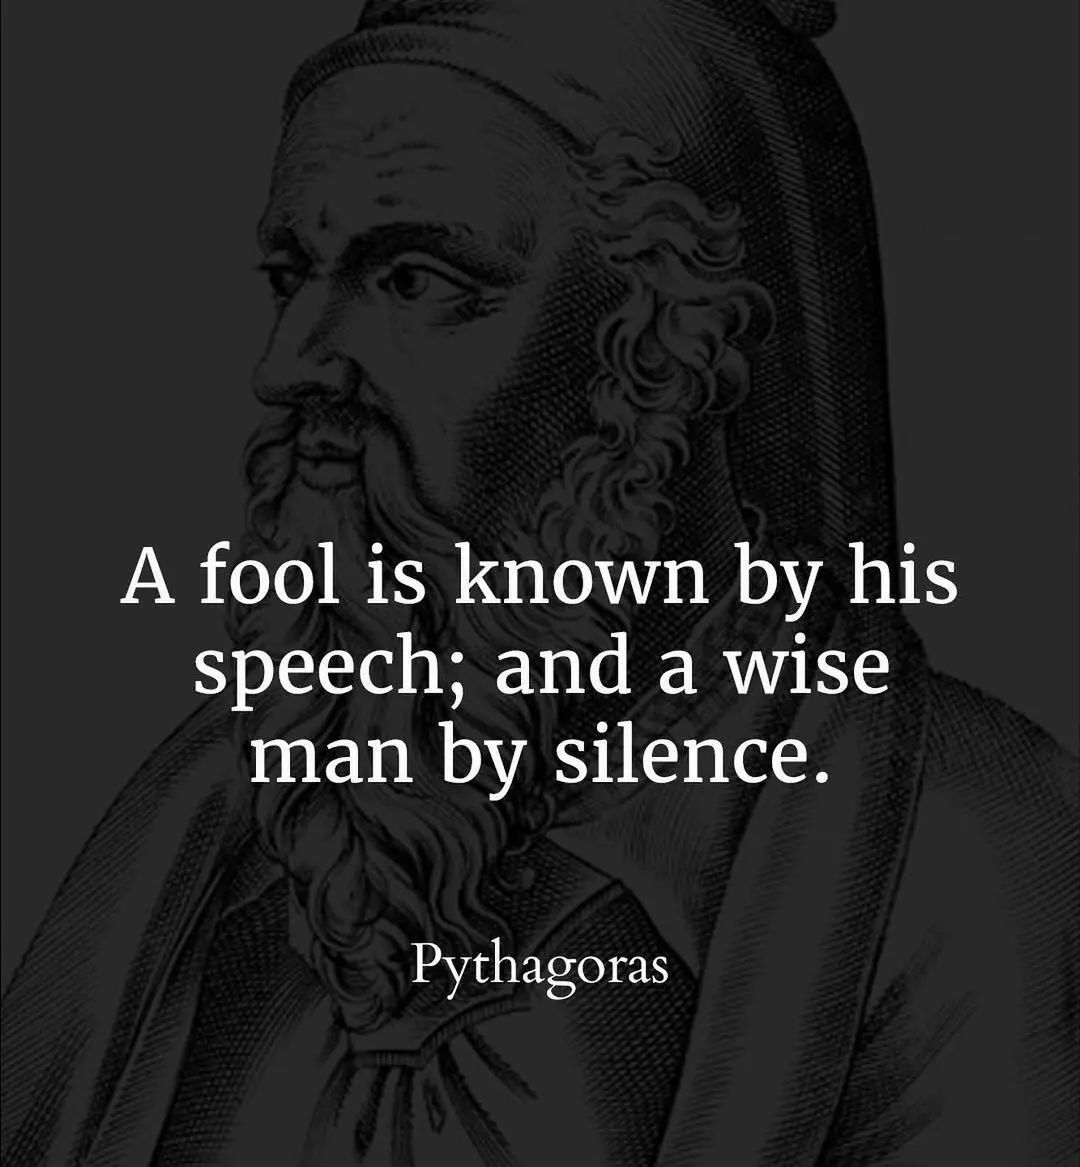 A fool is known by his speech and a wise man by silence.